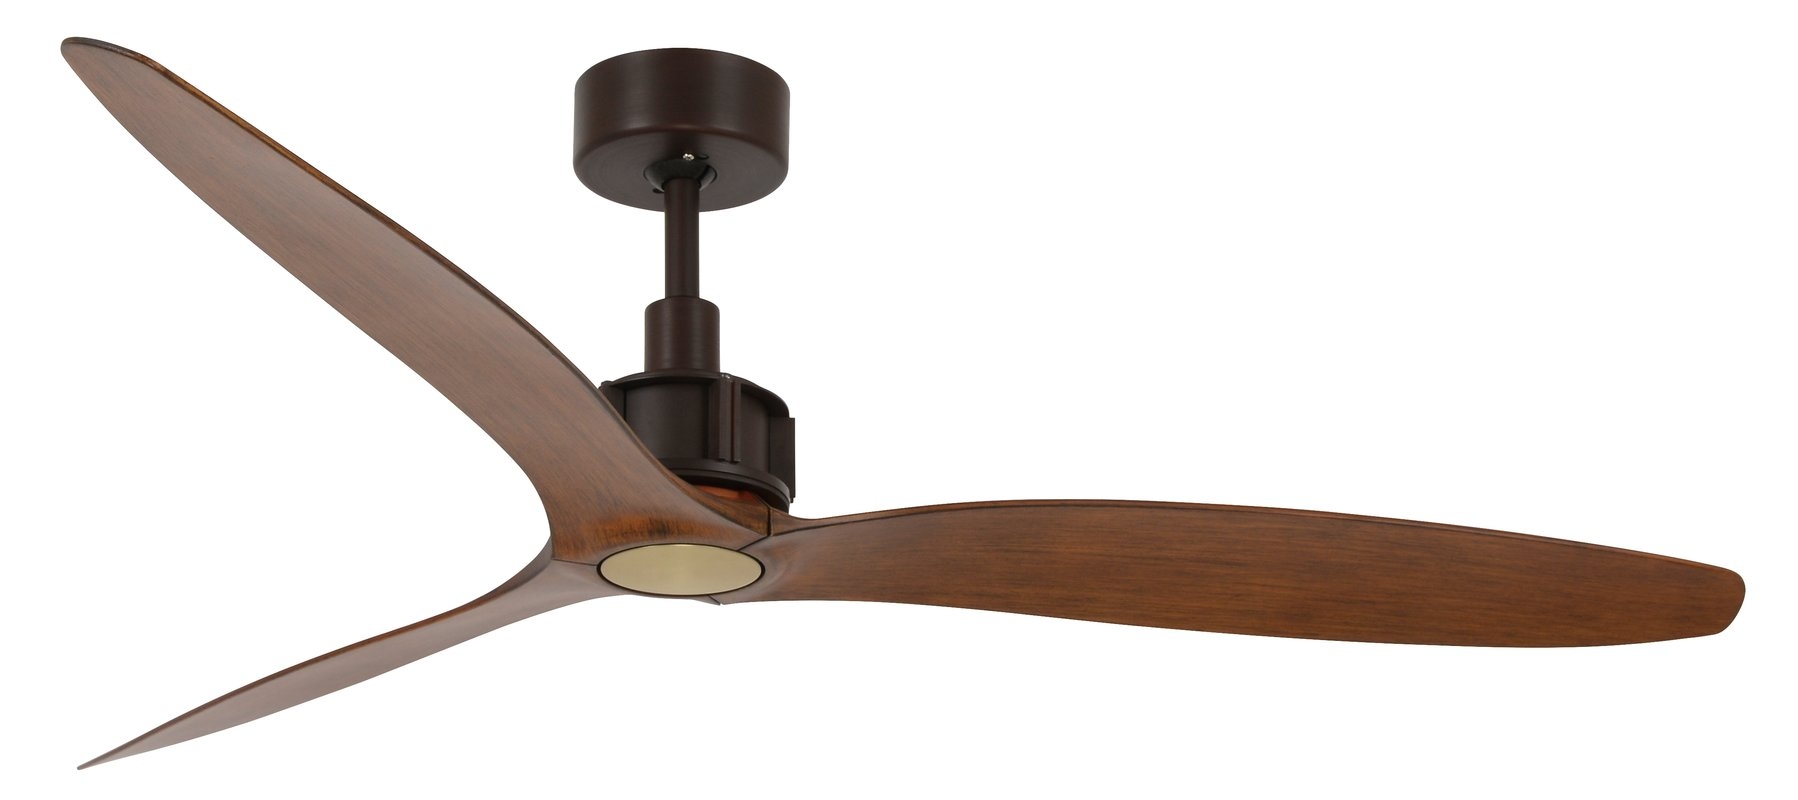 52" Catoe 3 Blade Ceiling Fan with Remote - Image 1